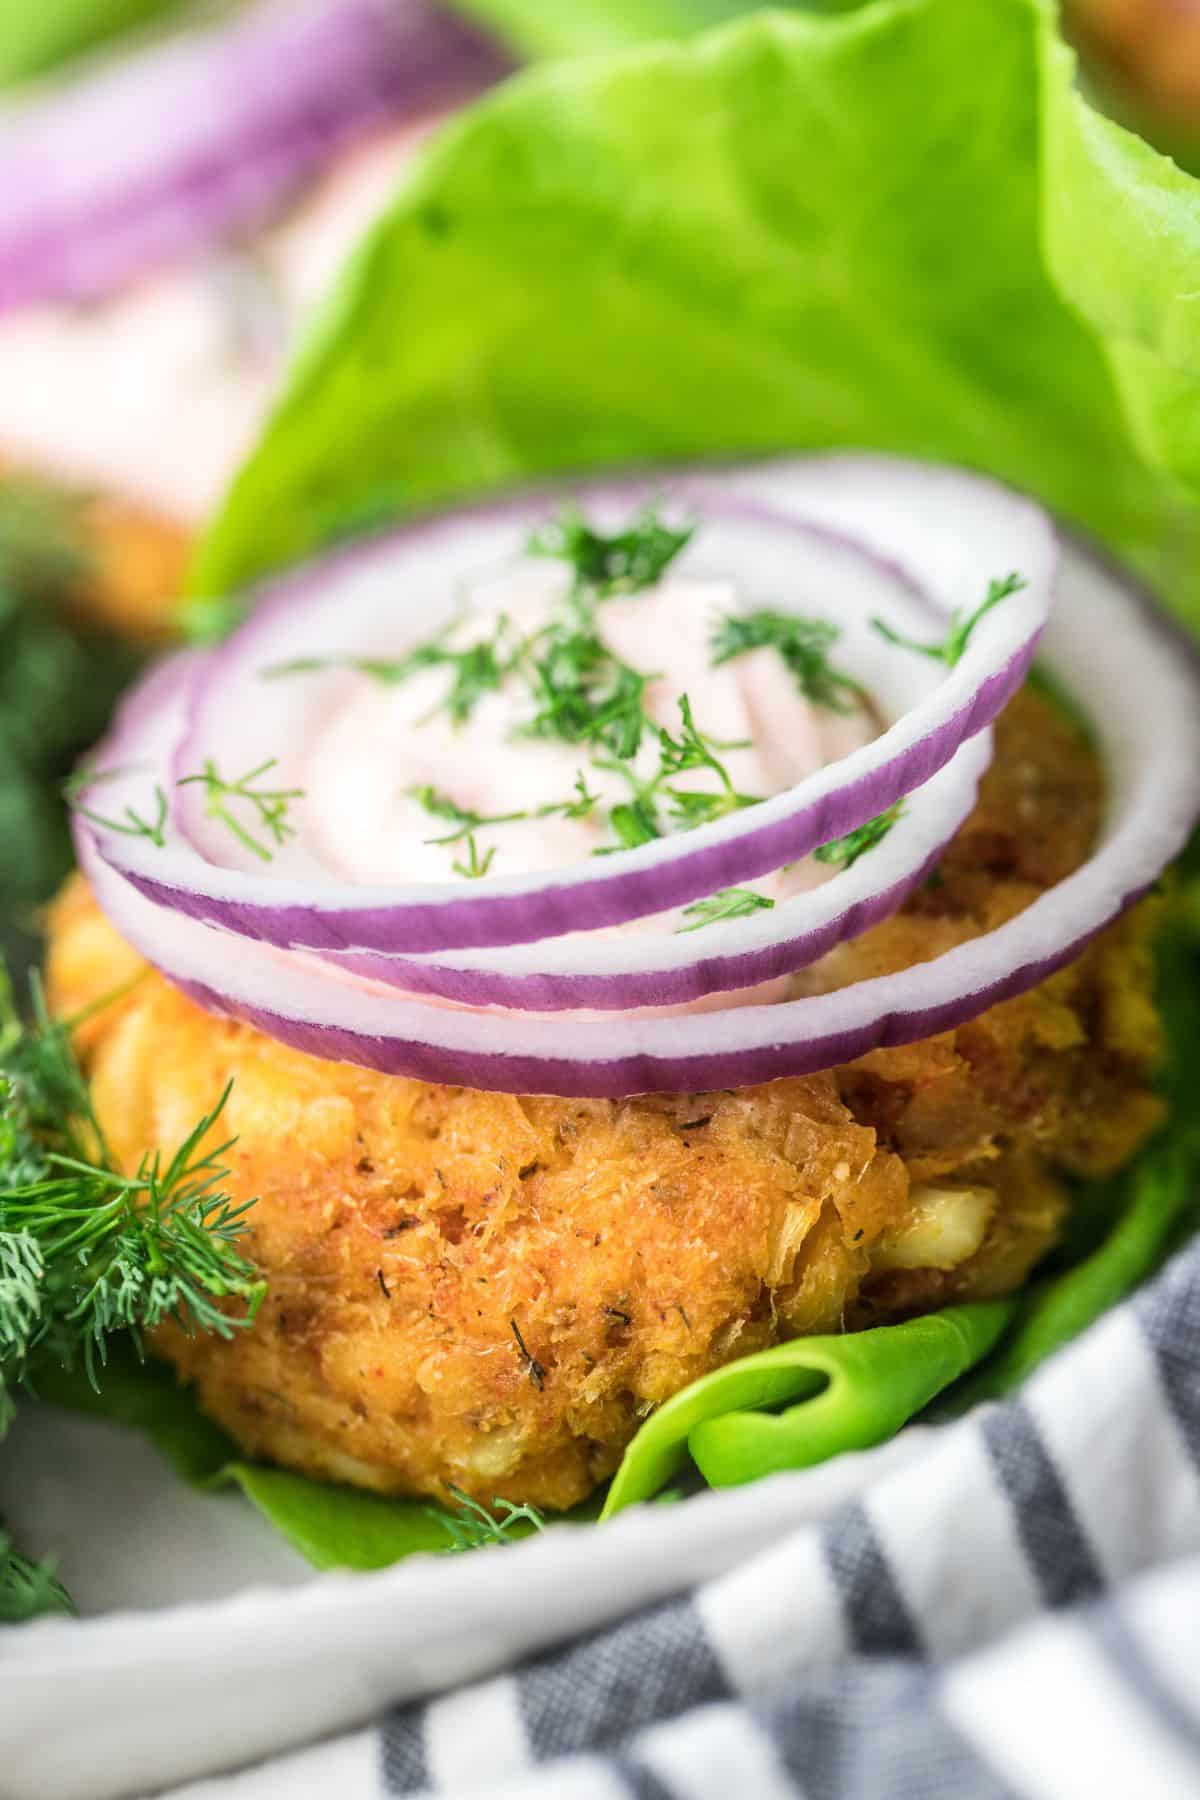 A healthy fish sandwich on a leaf of lettuce topped wit red onion slices, fresh dill and a sauce.